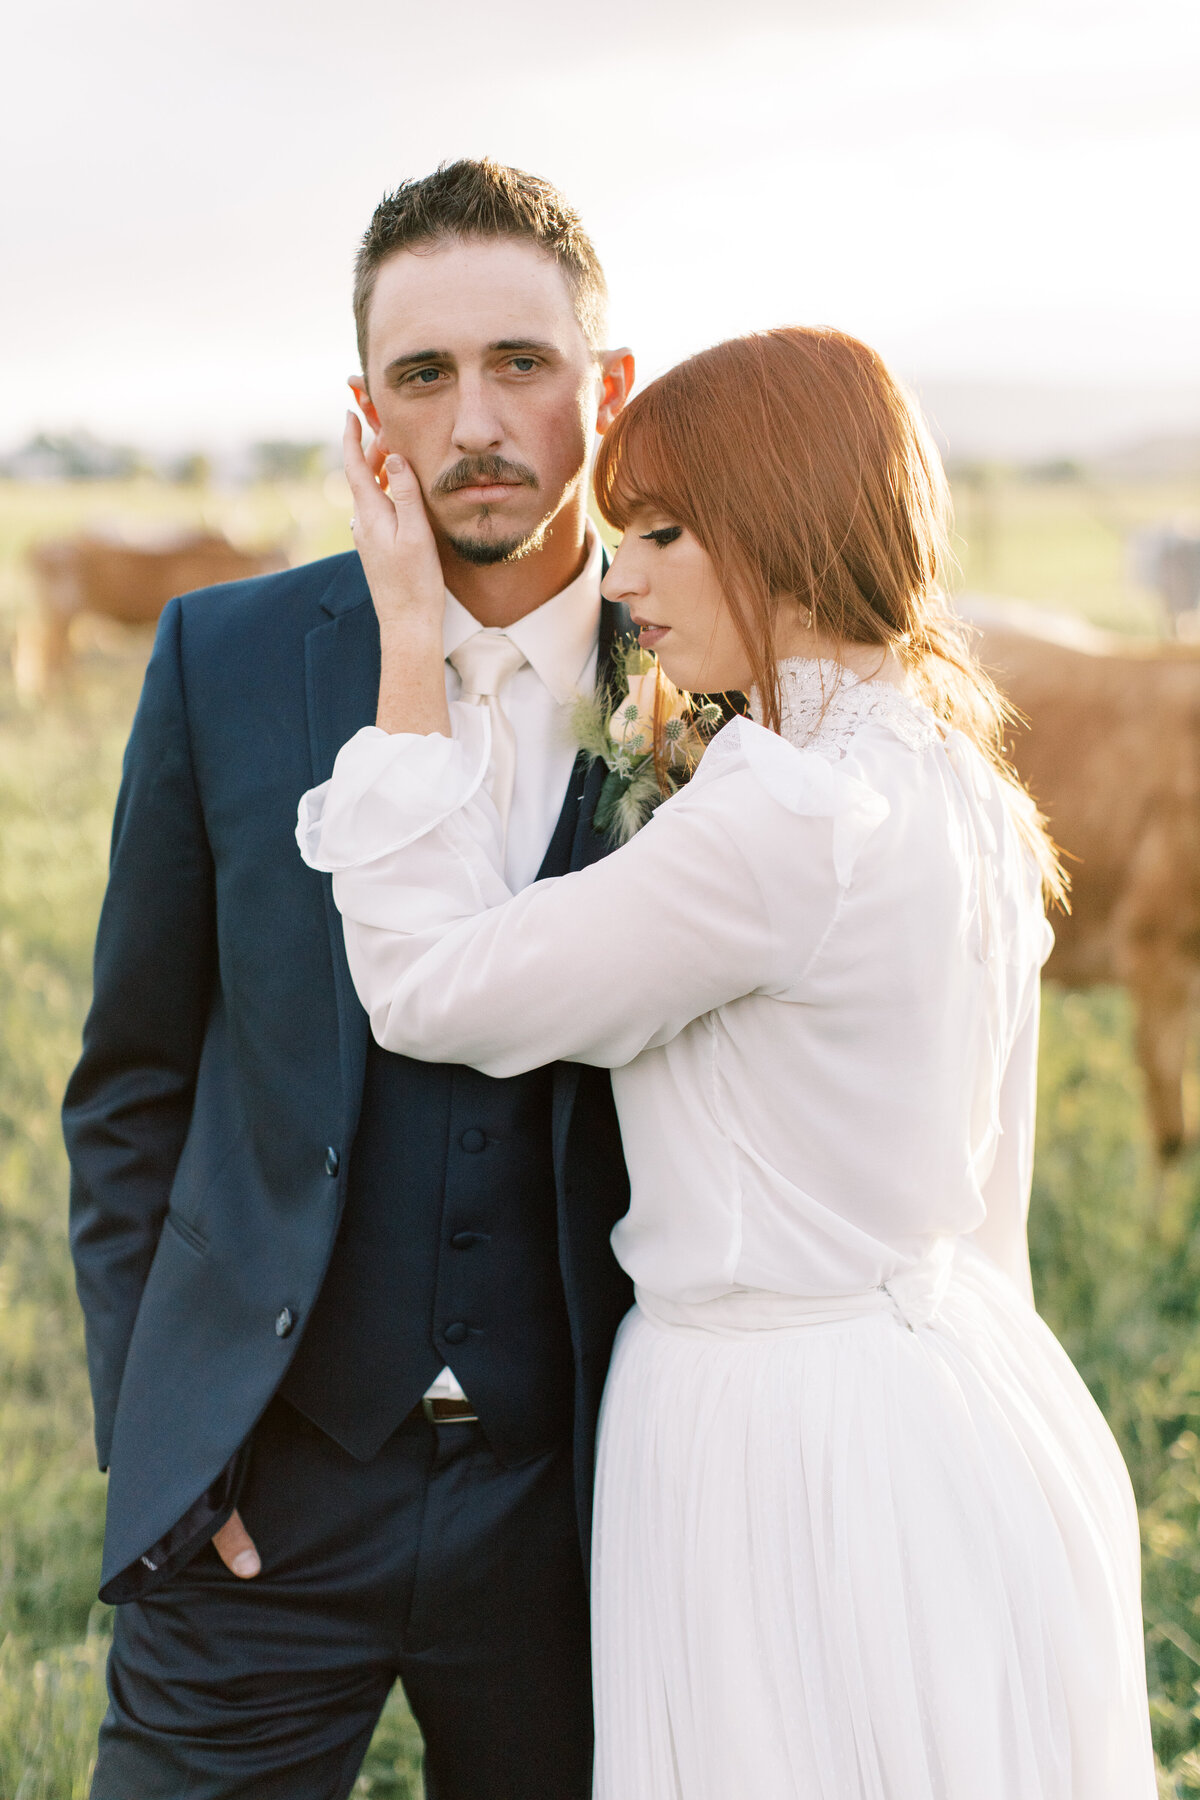 when-you-say-nothing-at-all-rustic-wedding-high-western-fashion-utah-1146